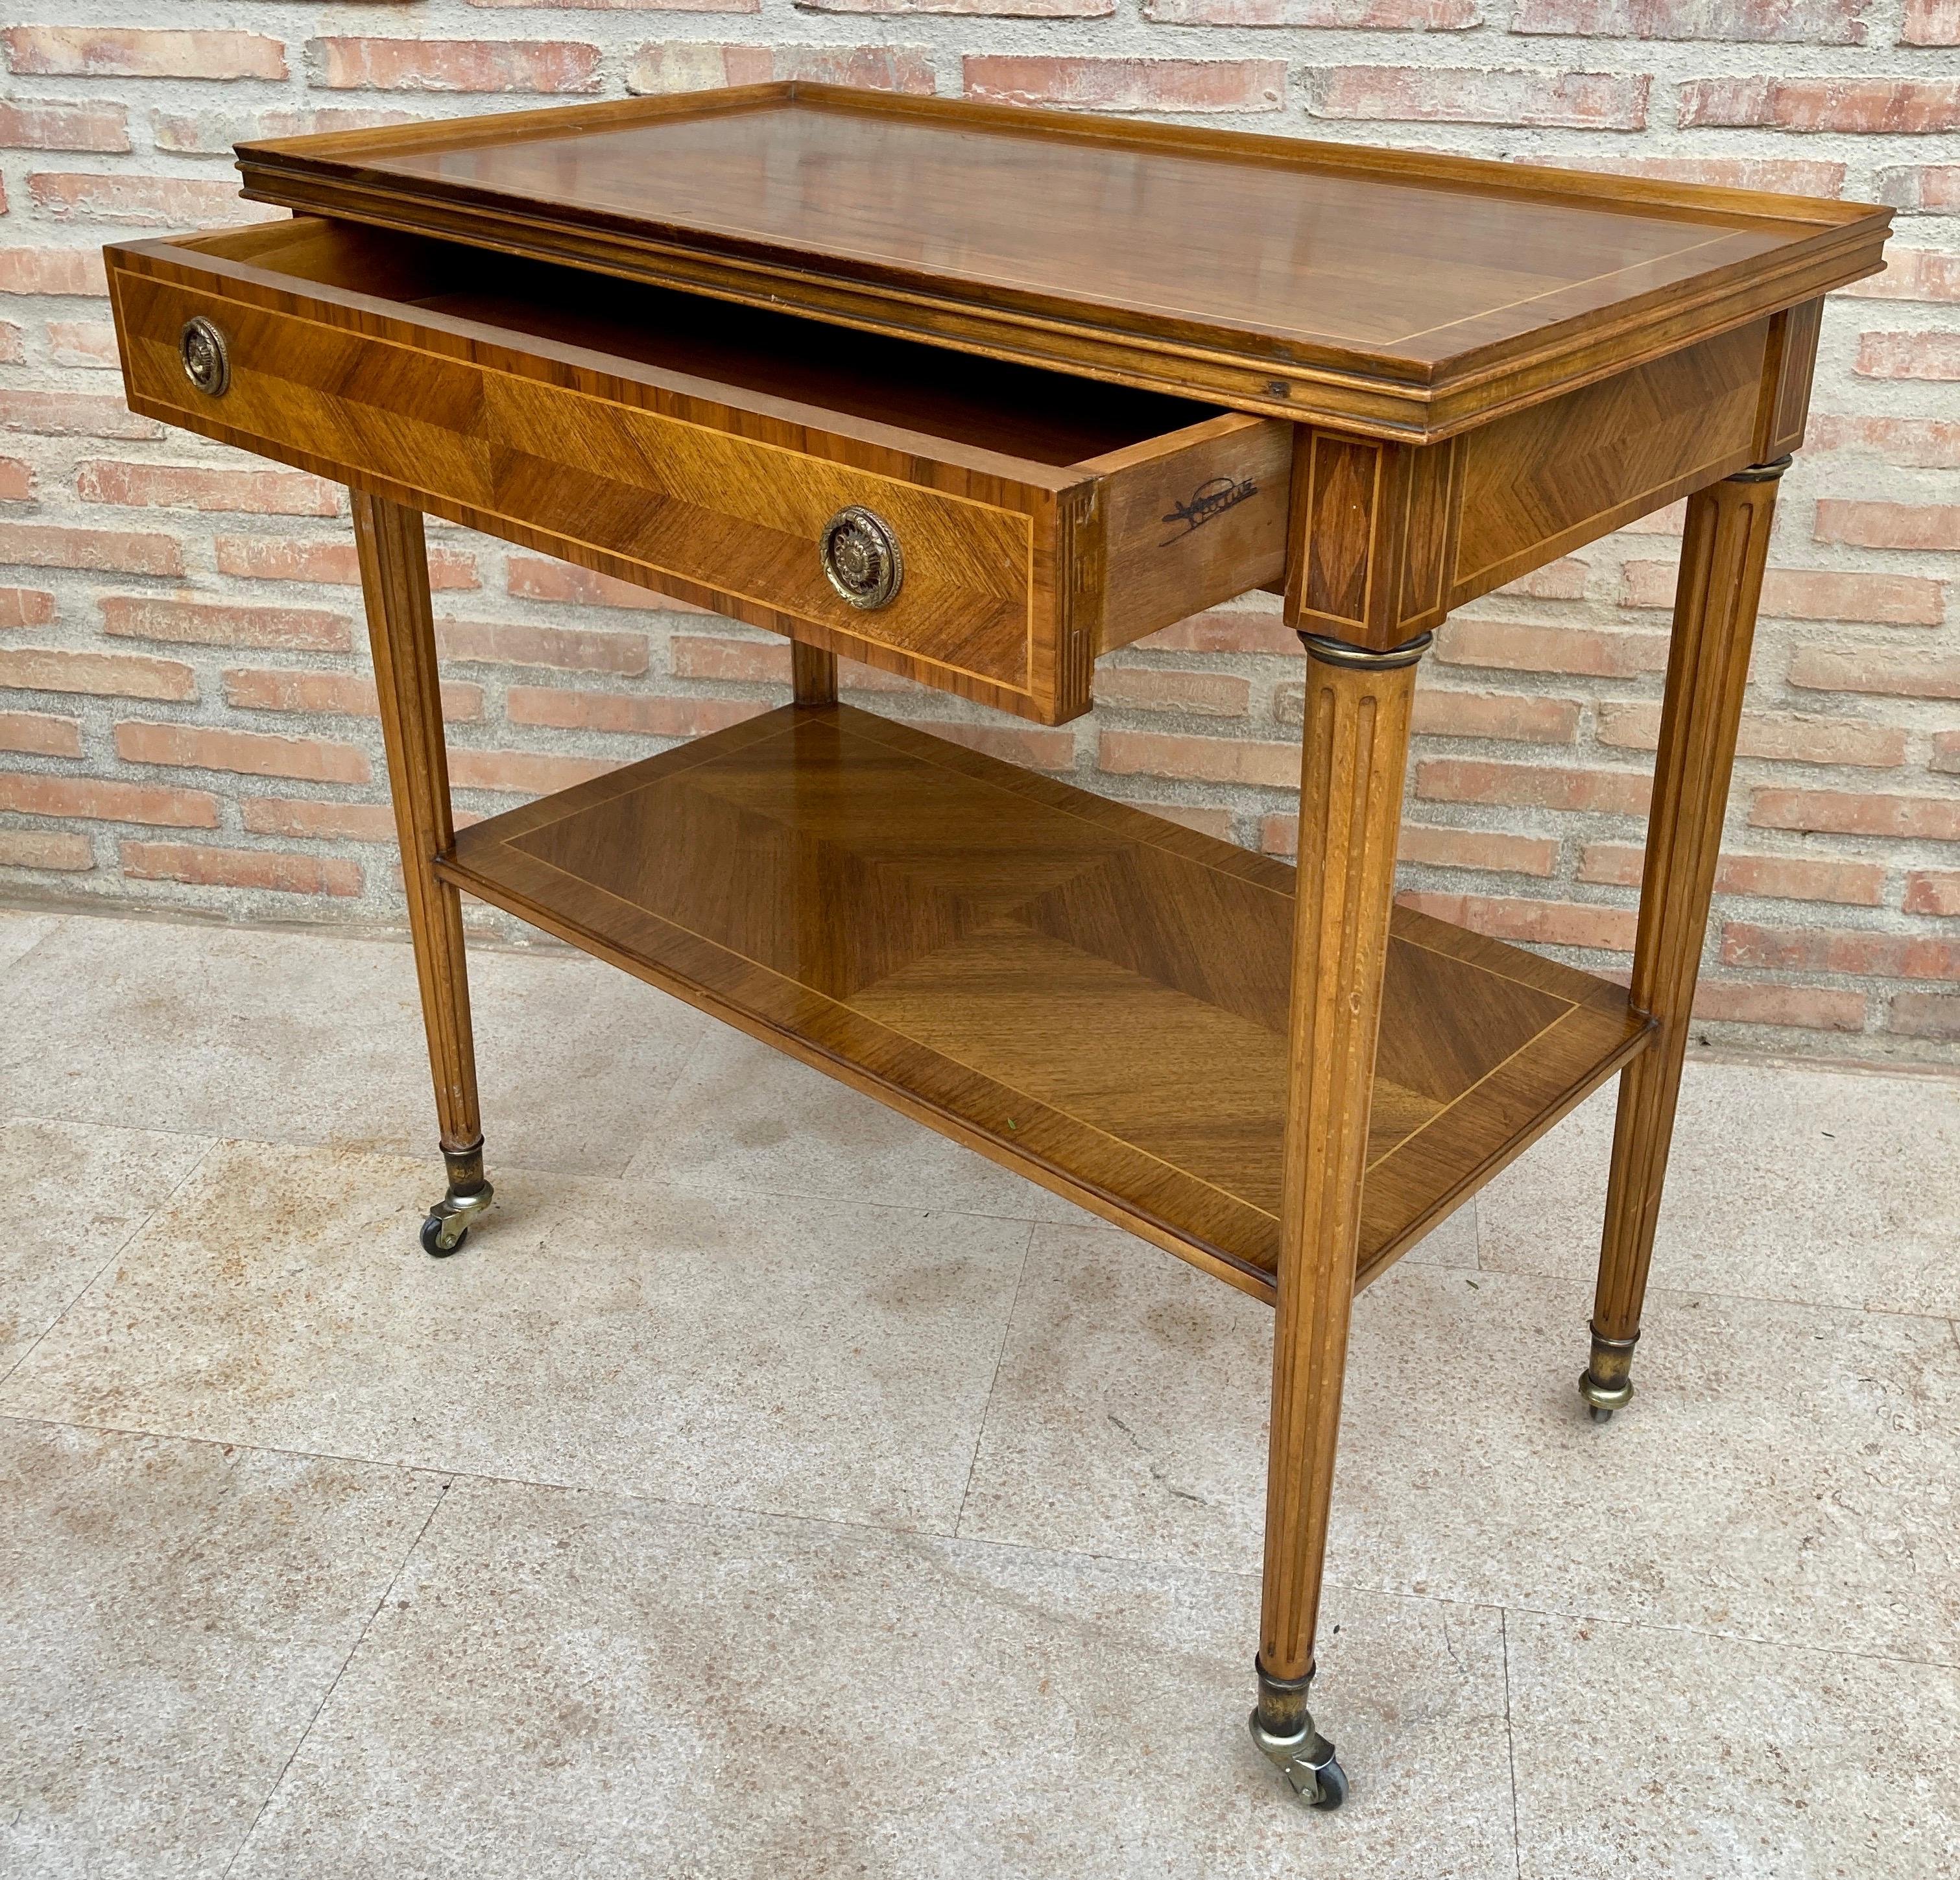 Neoclassic French Marquetry Side Table With One Drawer And Wheels 1940s For Sale 3